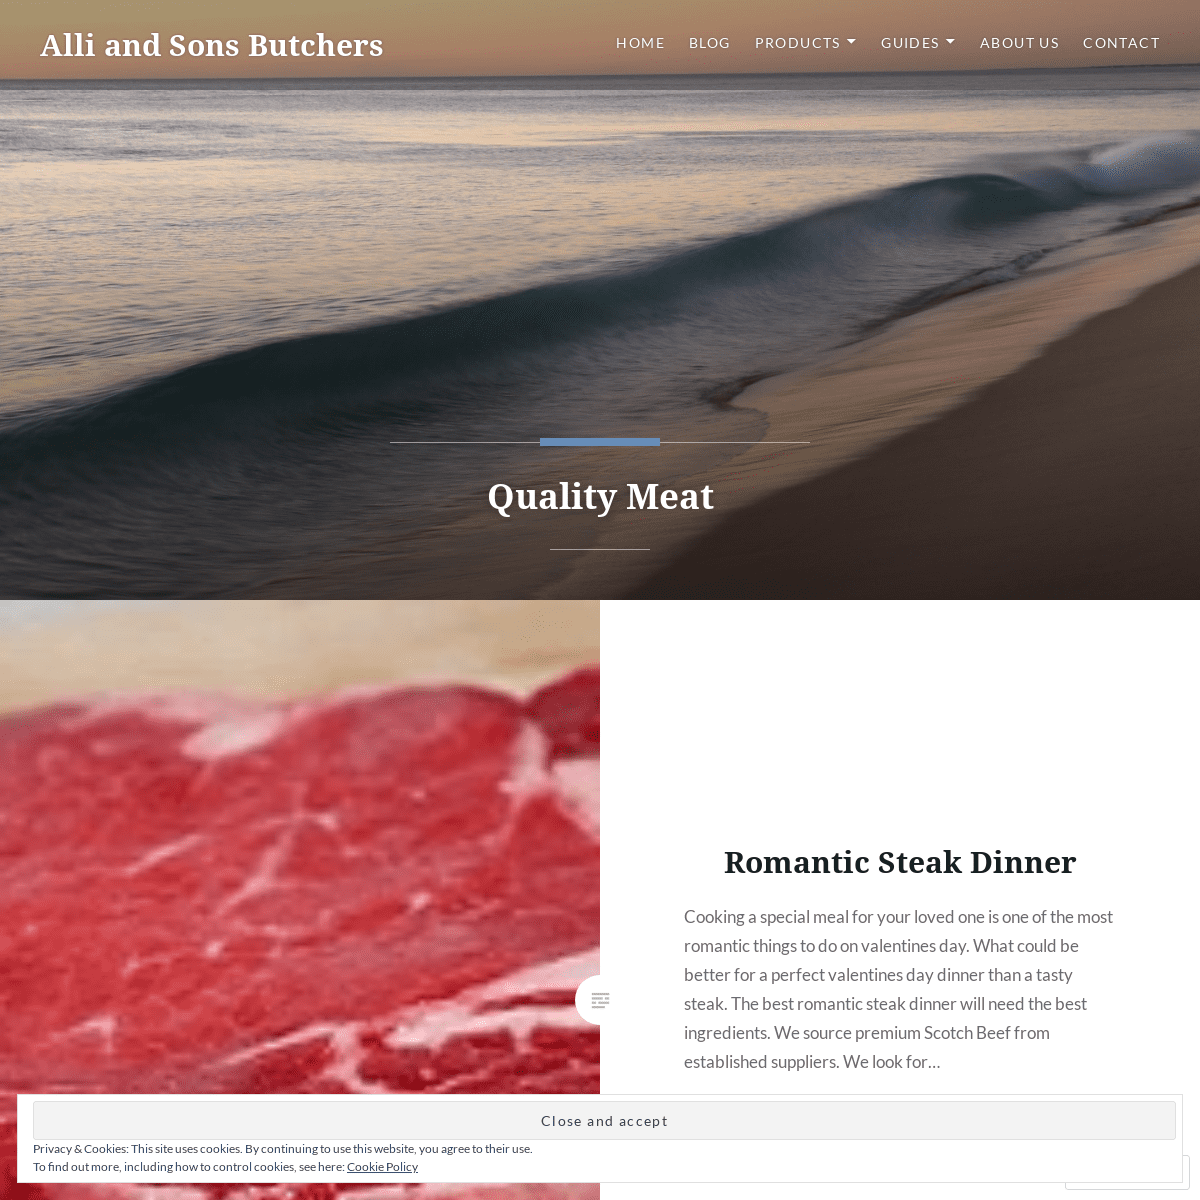 Alli and Sons Butchers – Quality Meat